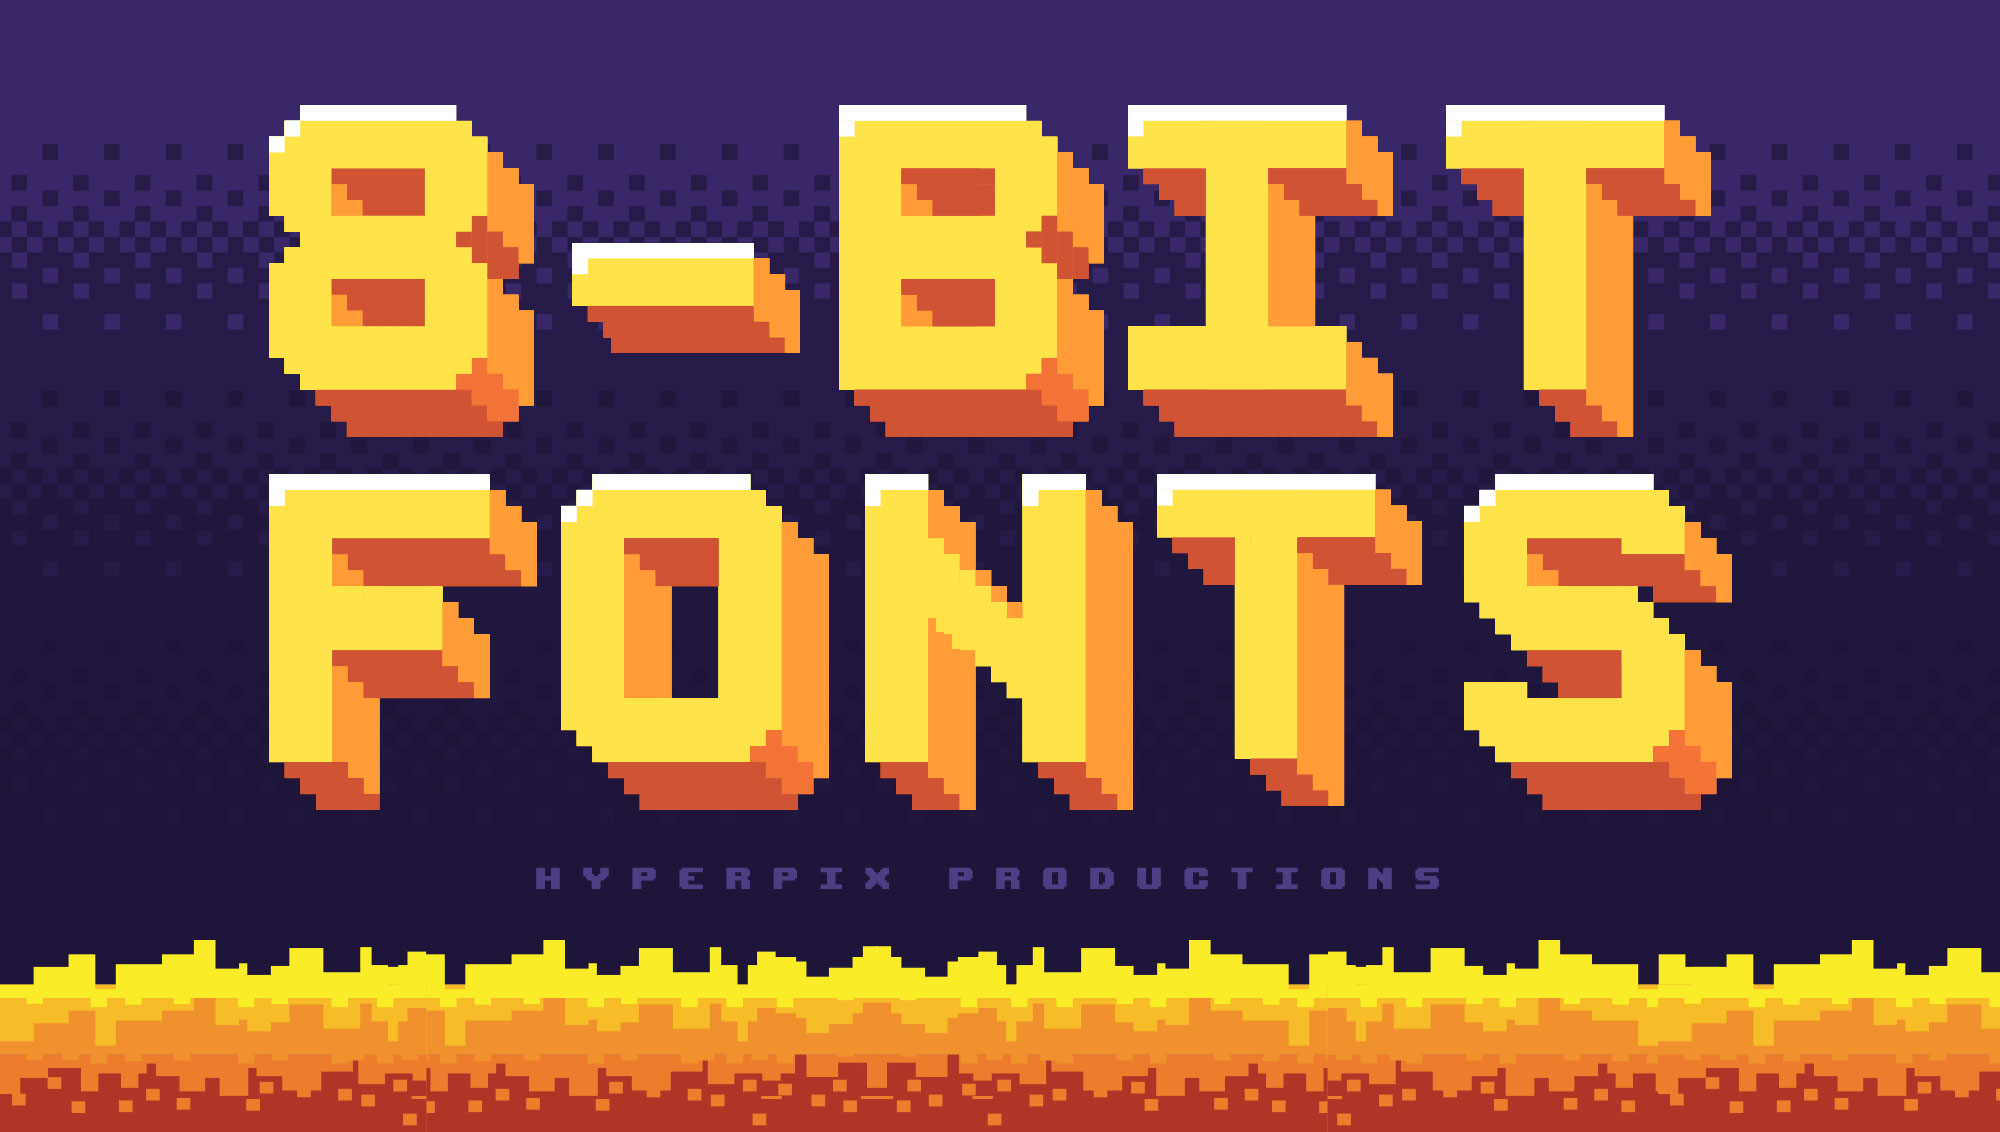 Minecraft Font FREE Download + (PSD Style)